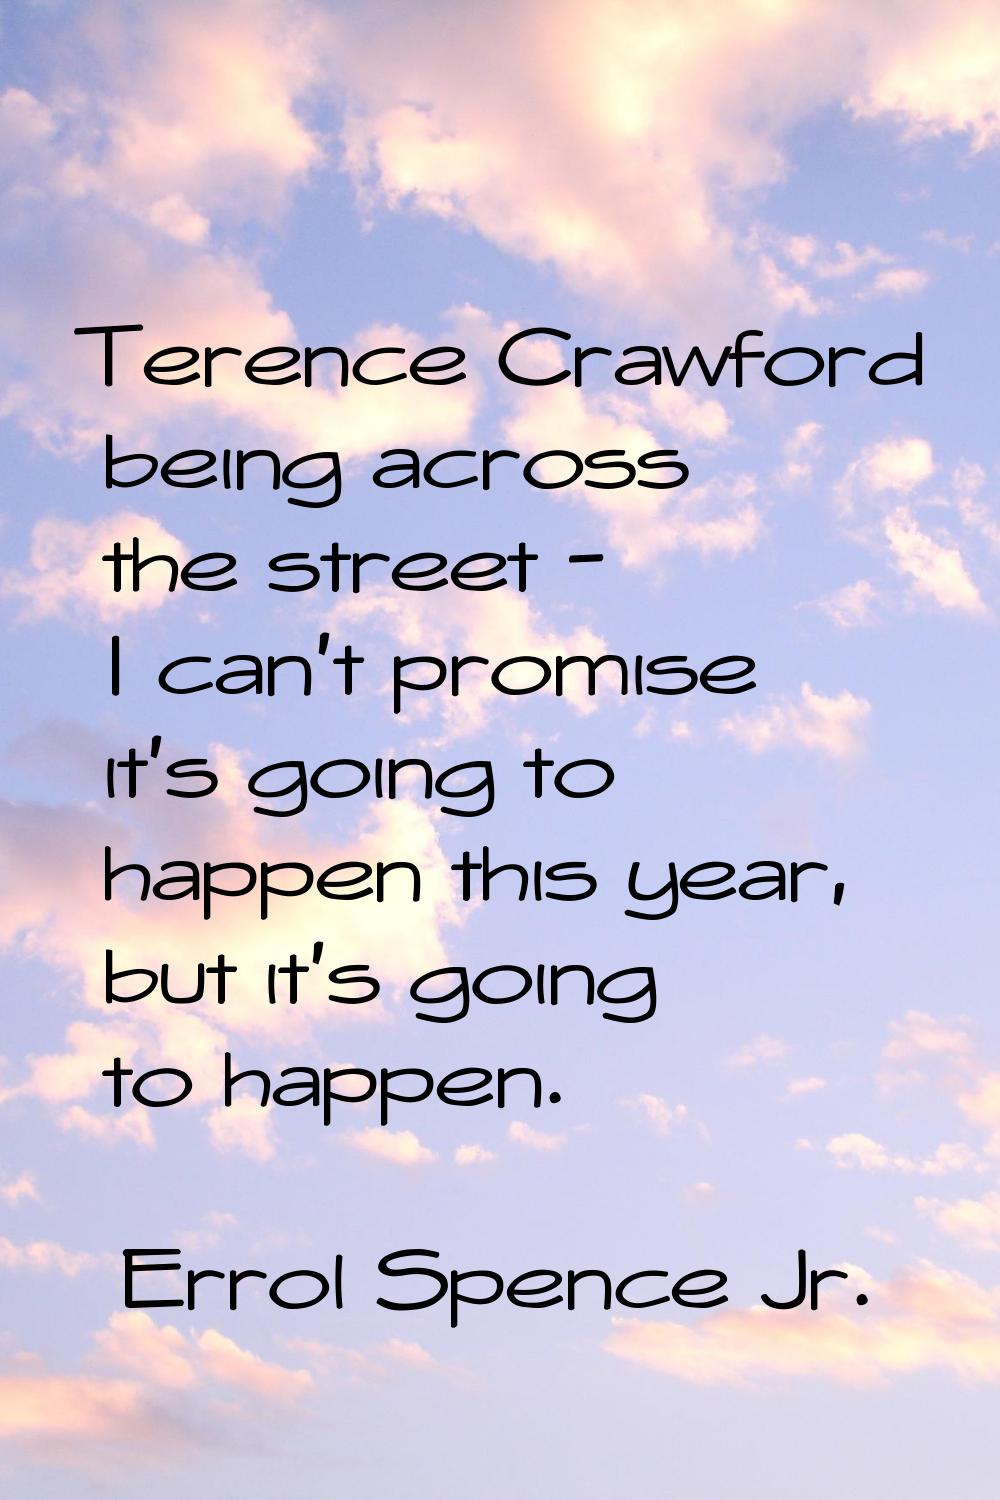 Terence Crawford being across the street - I can't promise it's going to happen this year, but it's